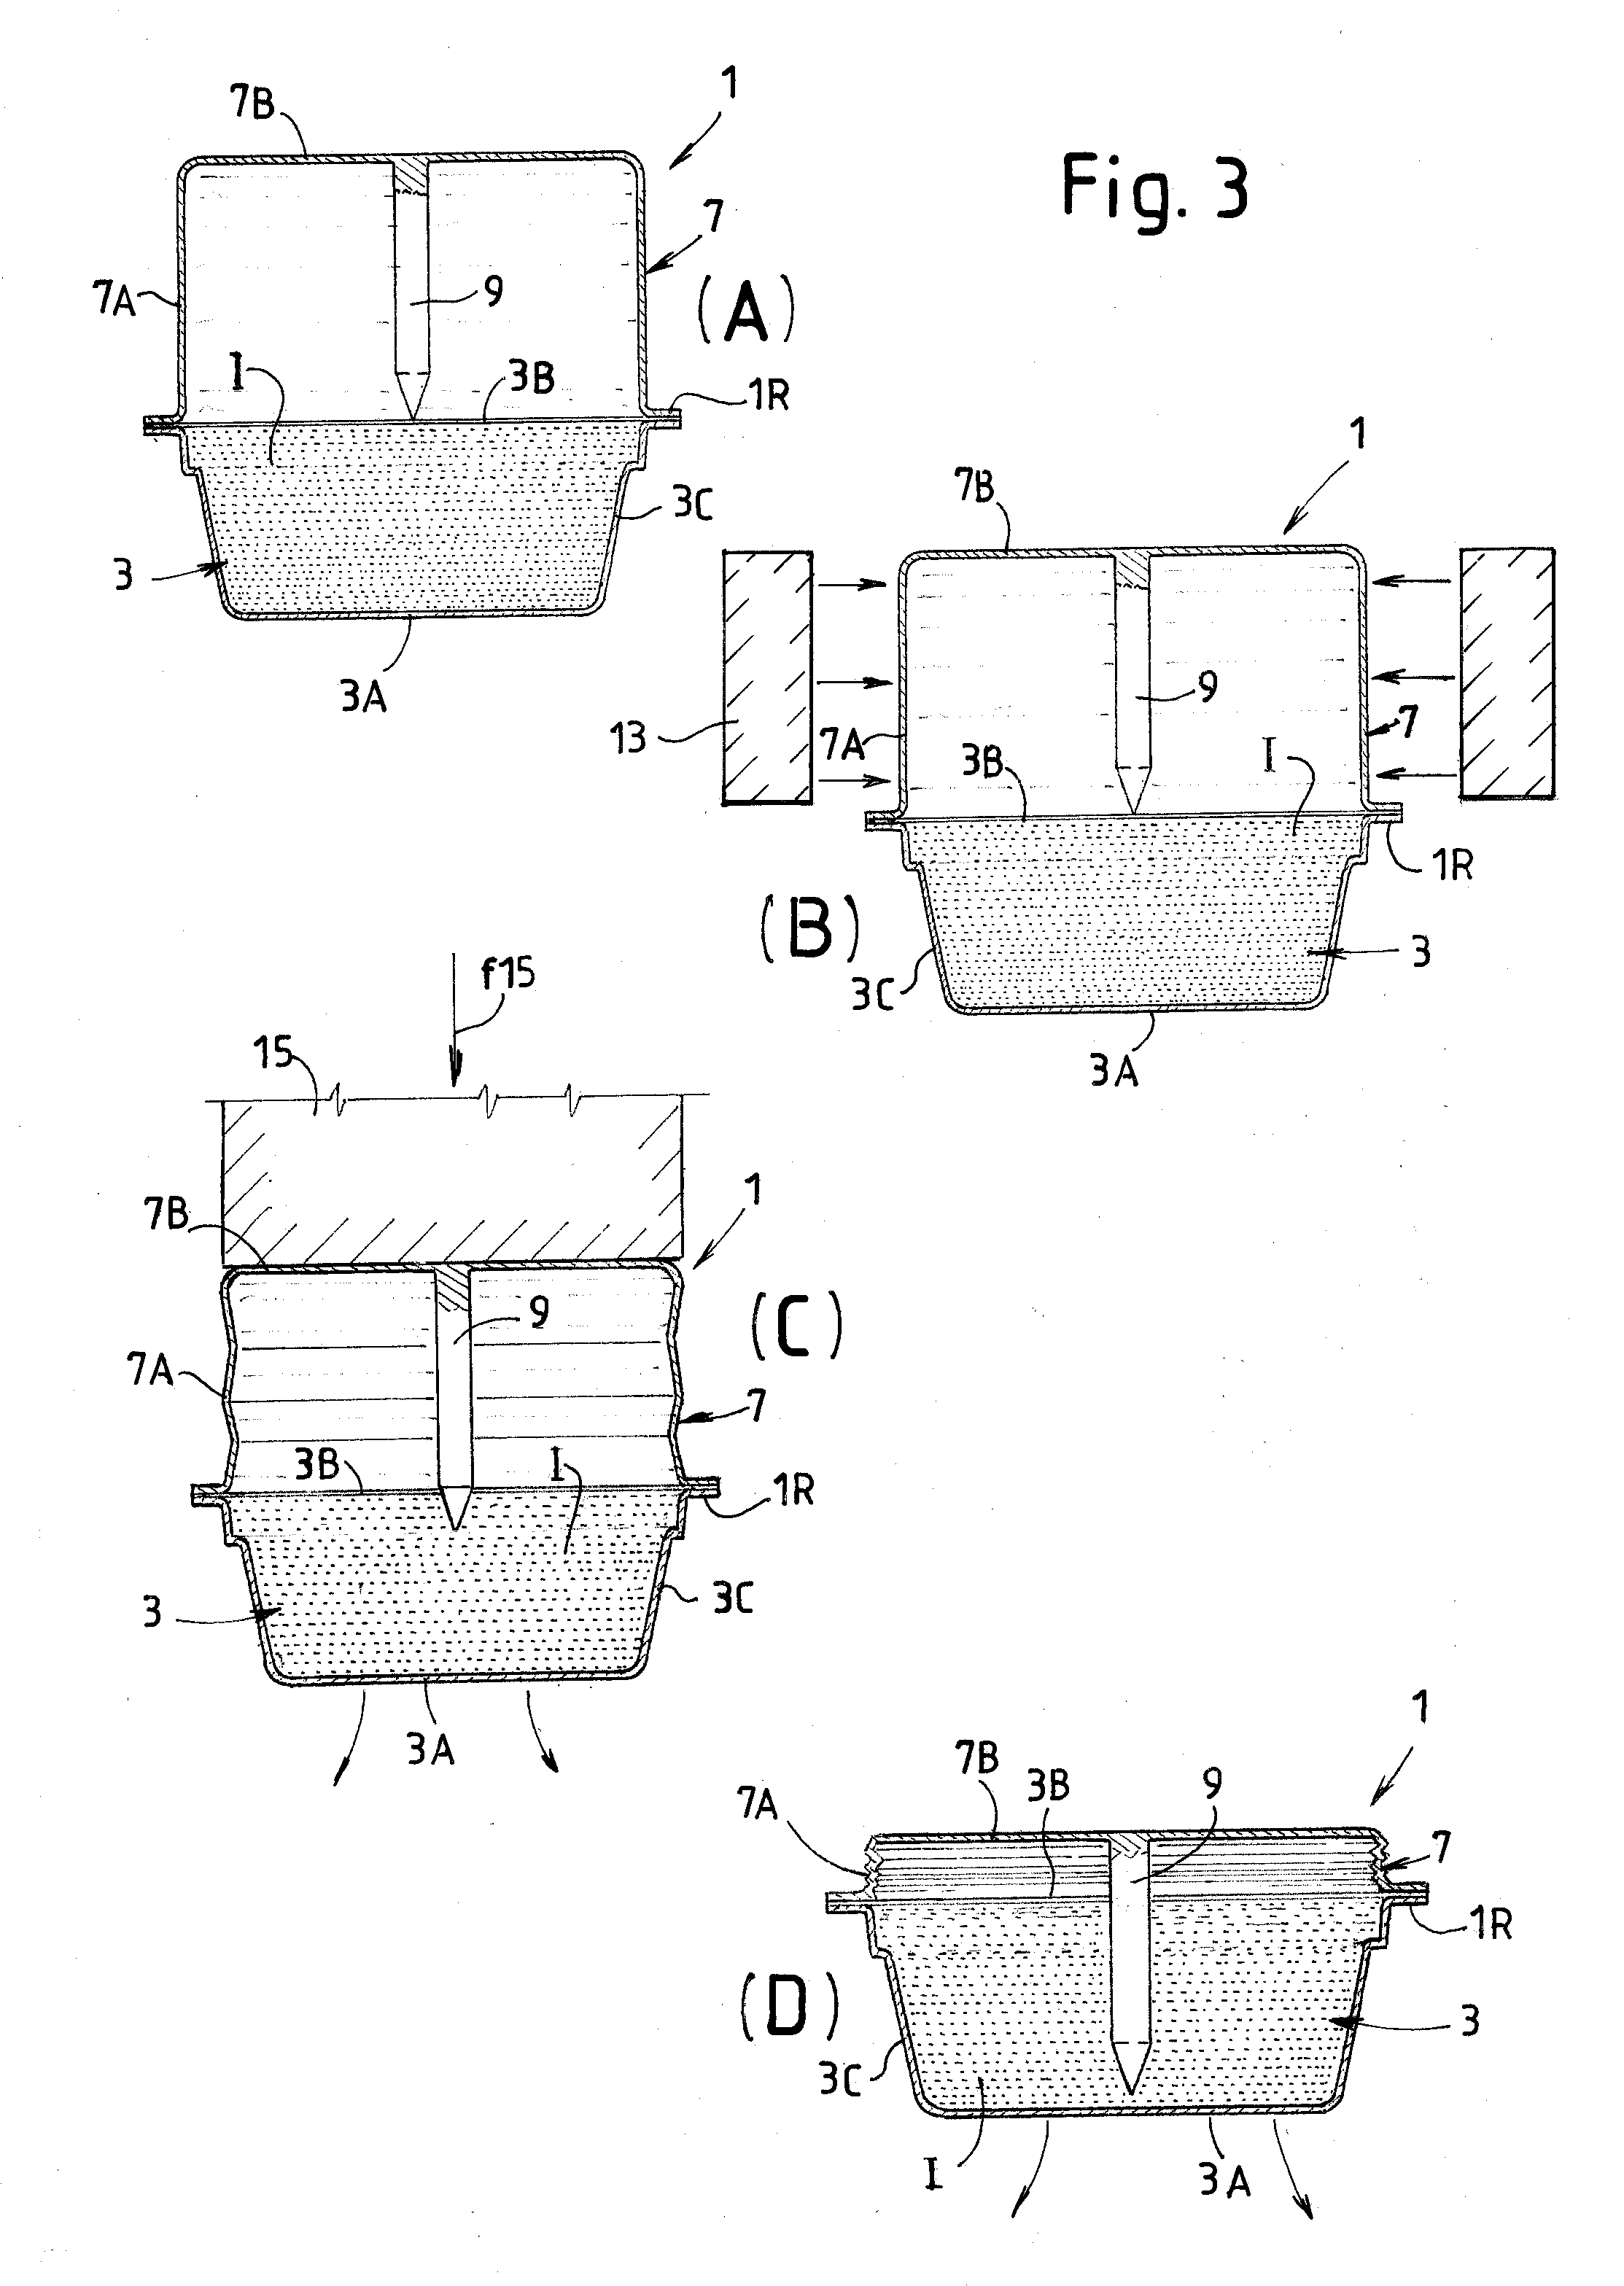 Capsule for the preparation of beverages, device and method